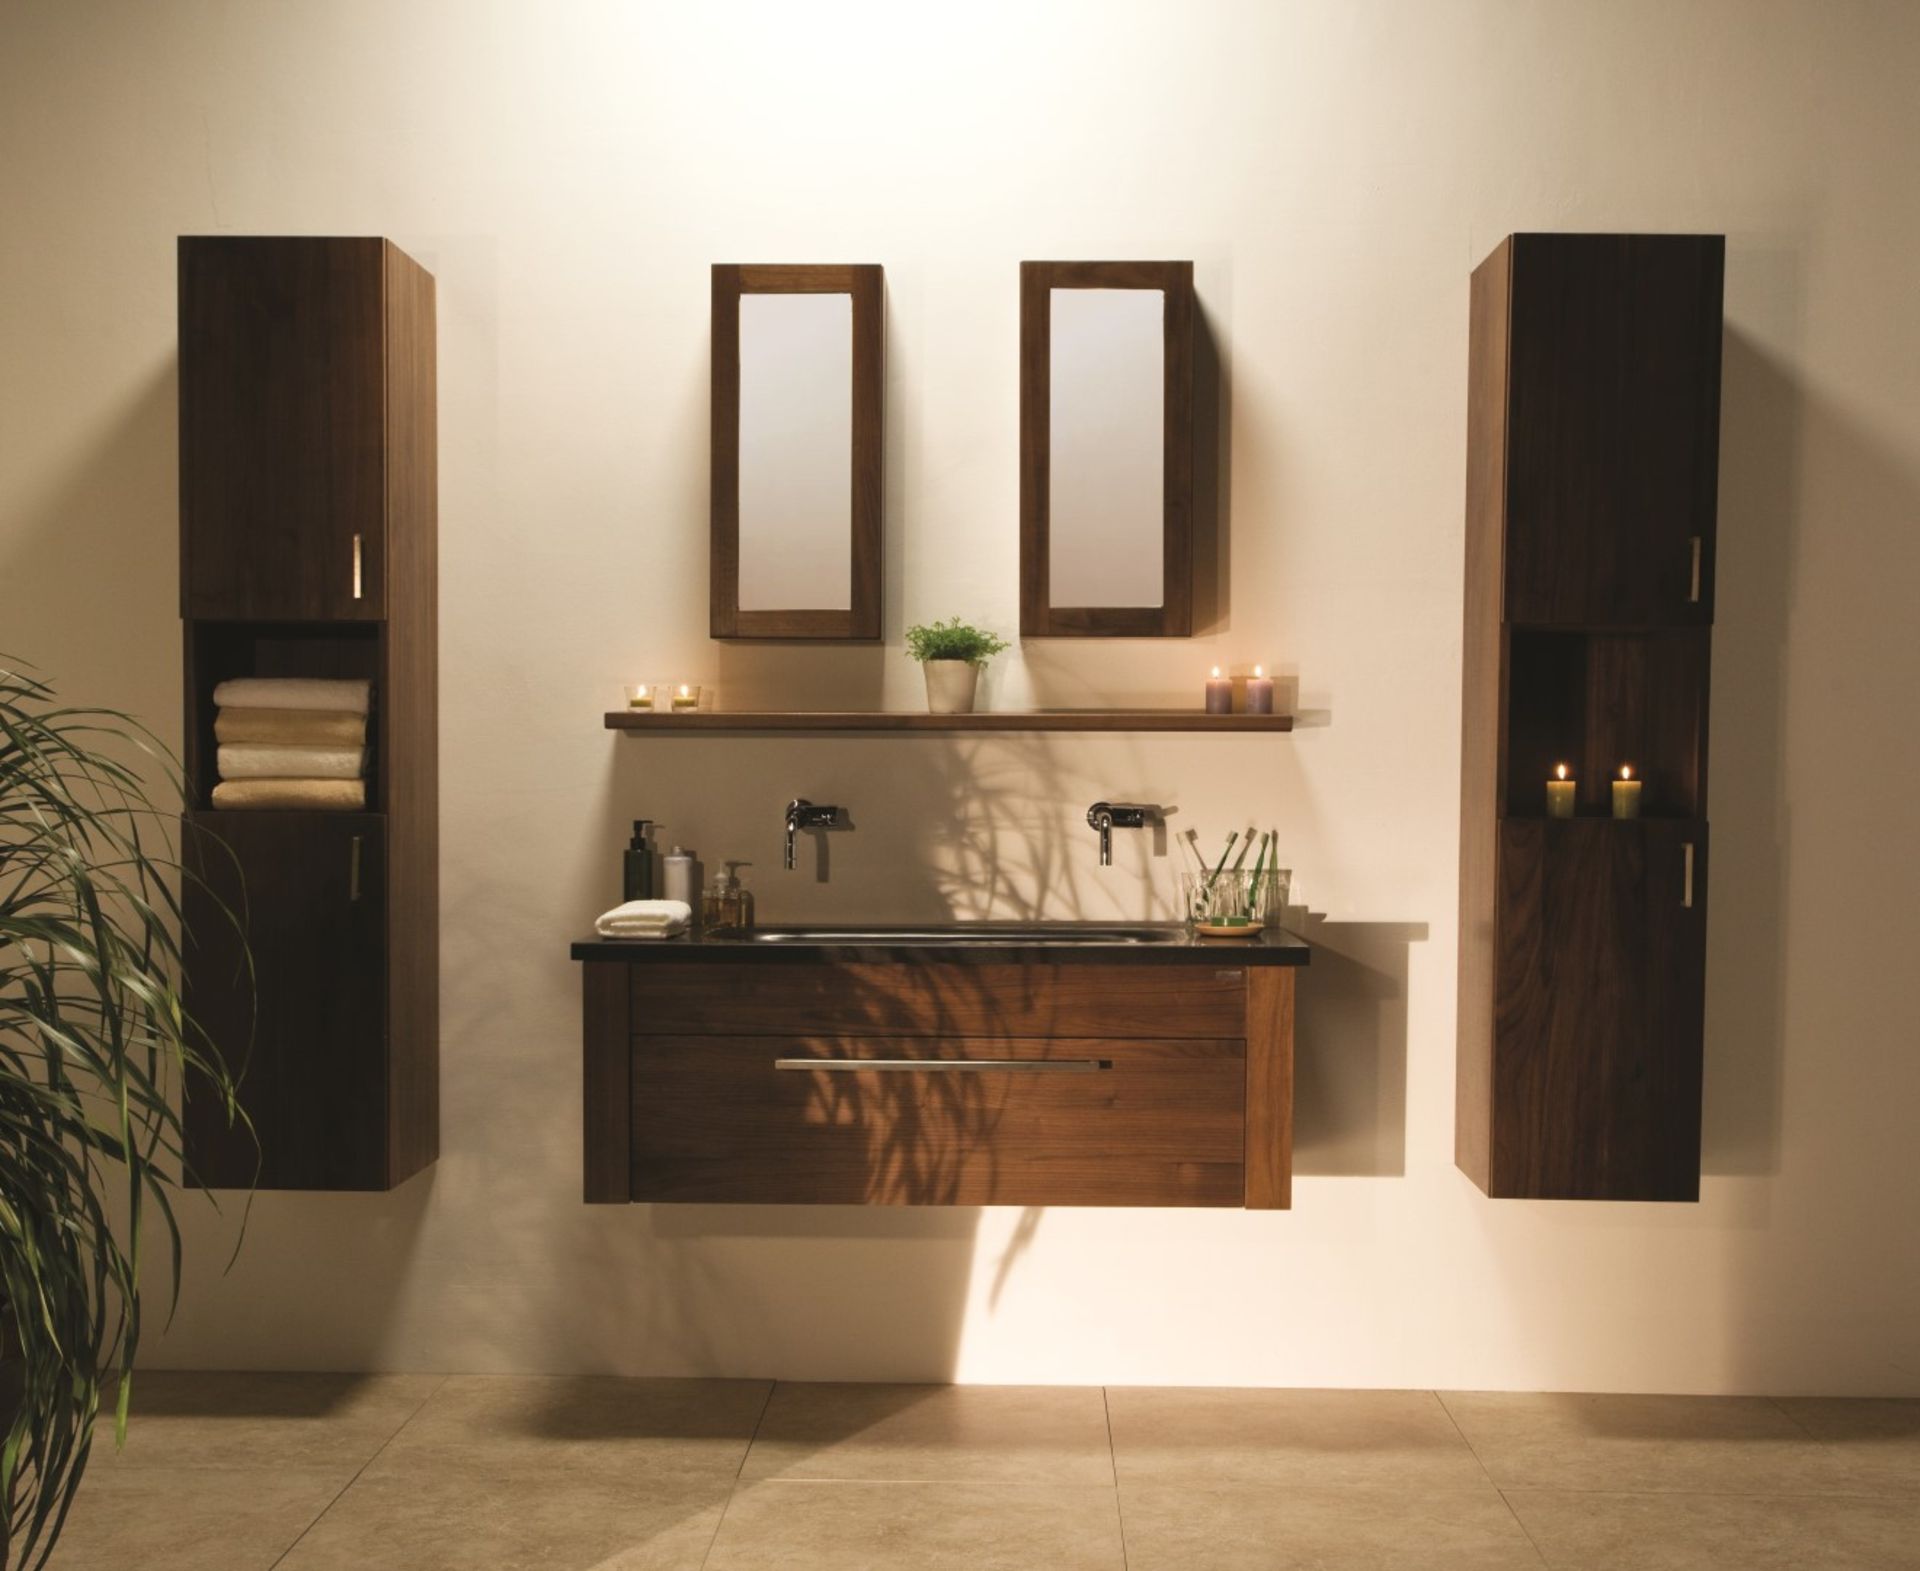 1 x Stonearth Bathroom Storage Shelf With Concealed Brackets - American Solid Walnut - Size: 900mm - Image 4 of 16